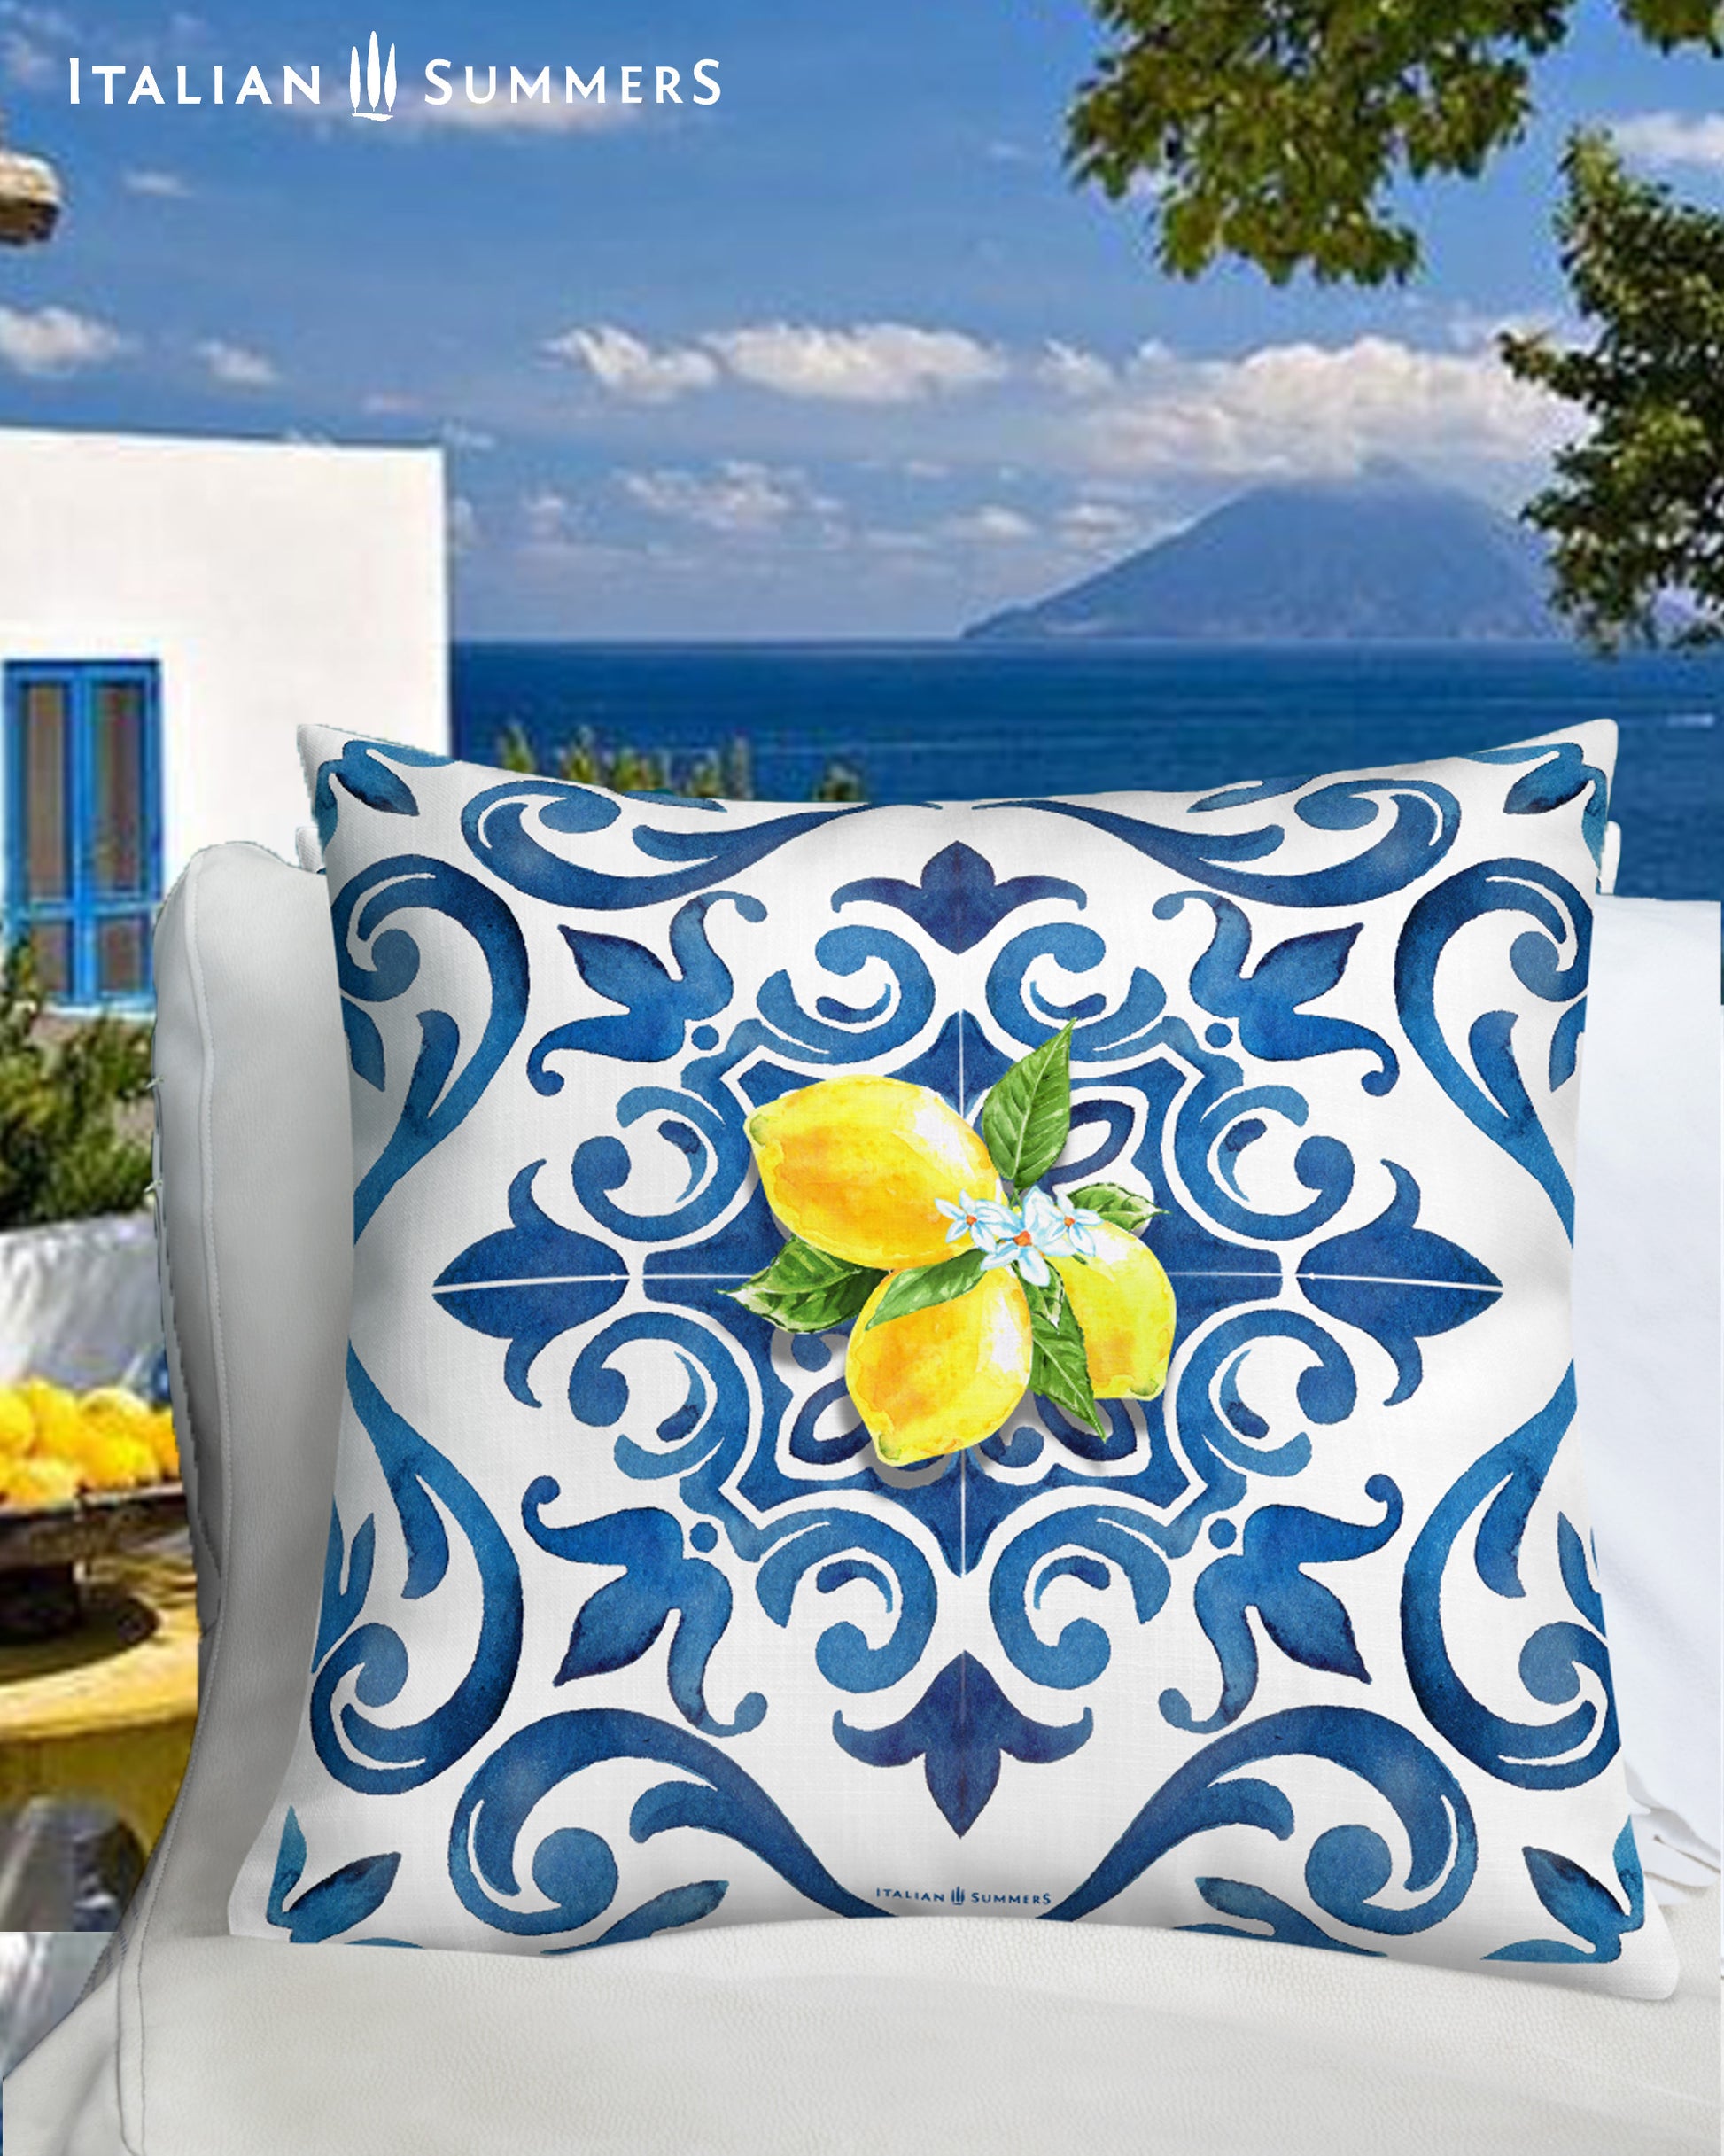 Italy inspired square pillow printed with a big blue white tile. In the center of the tile there is a bundle of big Sorrento lemons. Gives a true Italian summer feeling to your livingroom or terras. Made by Italian Summers.